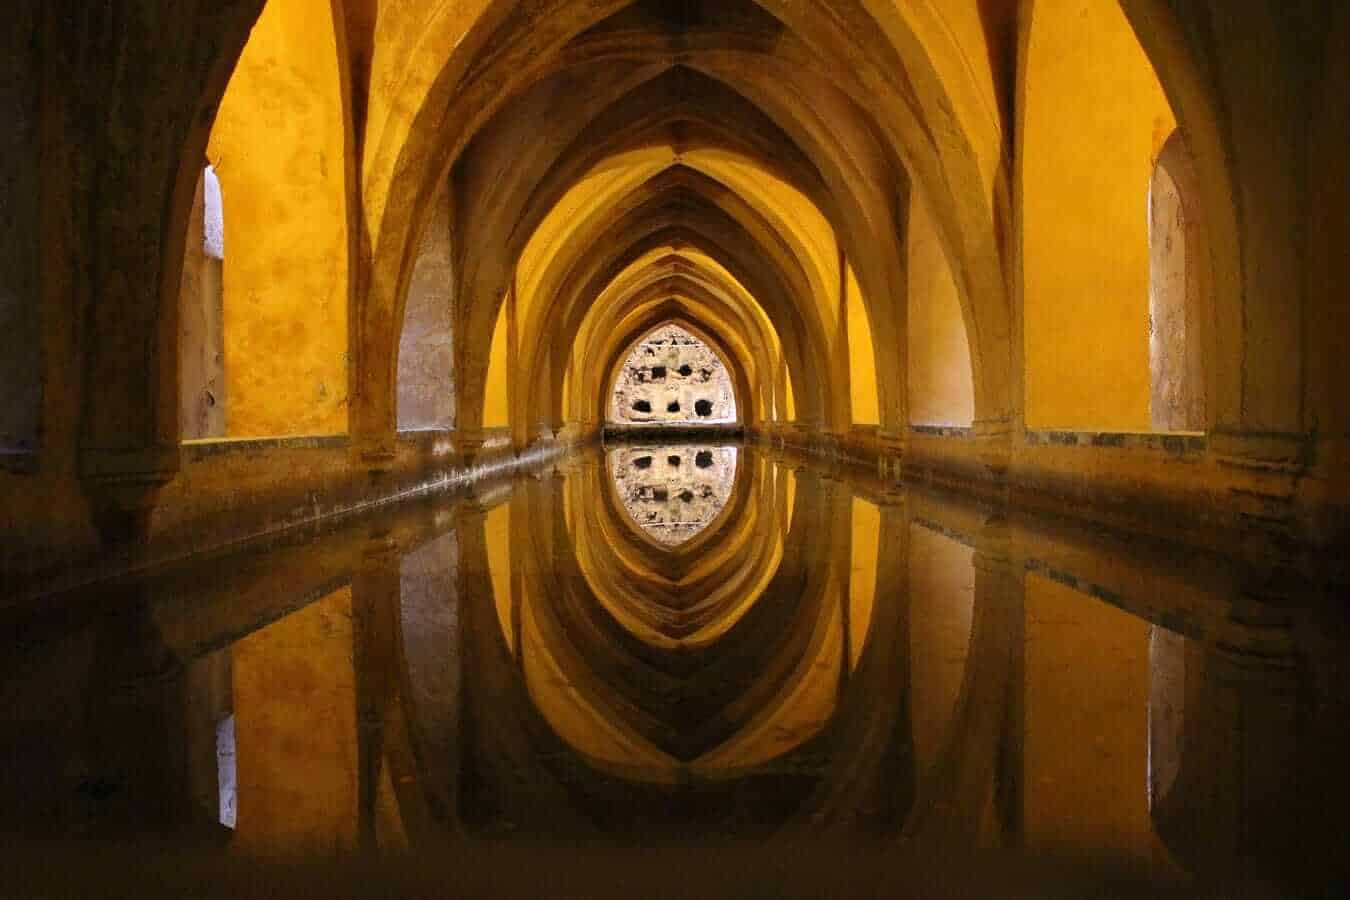 Game of Thrones Locations - Royal Alcázar of Seville, Spain